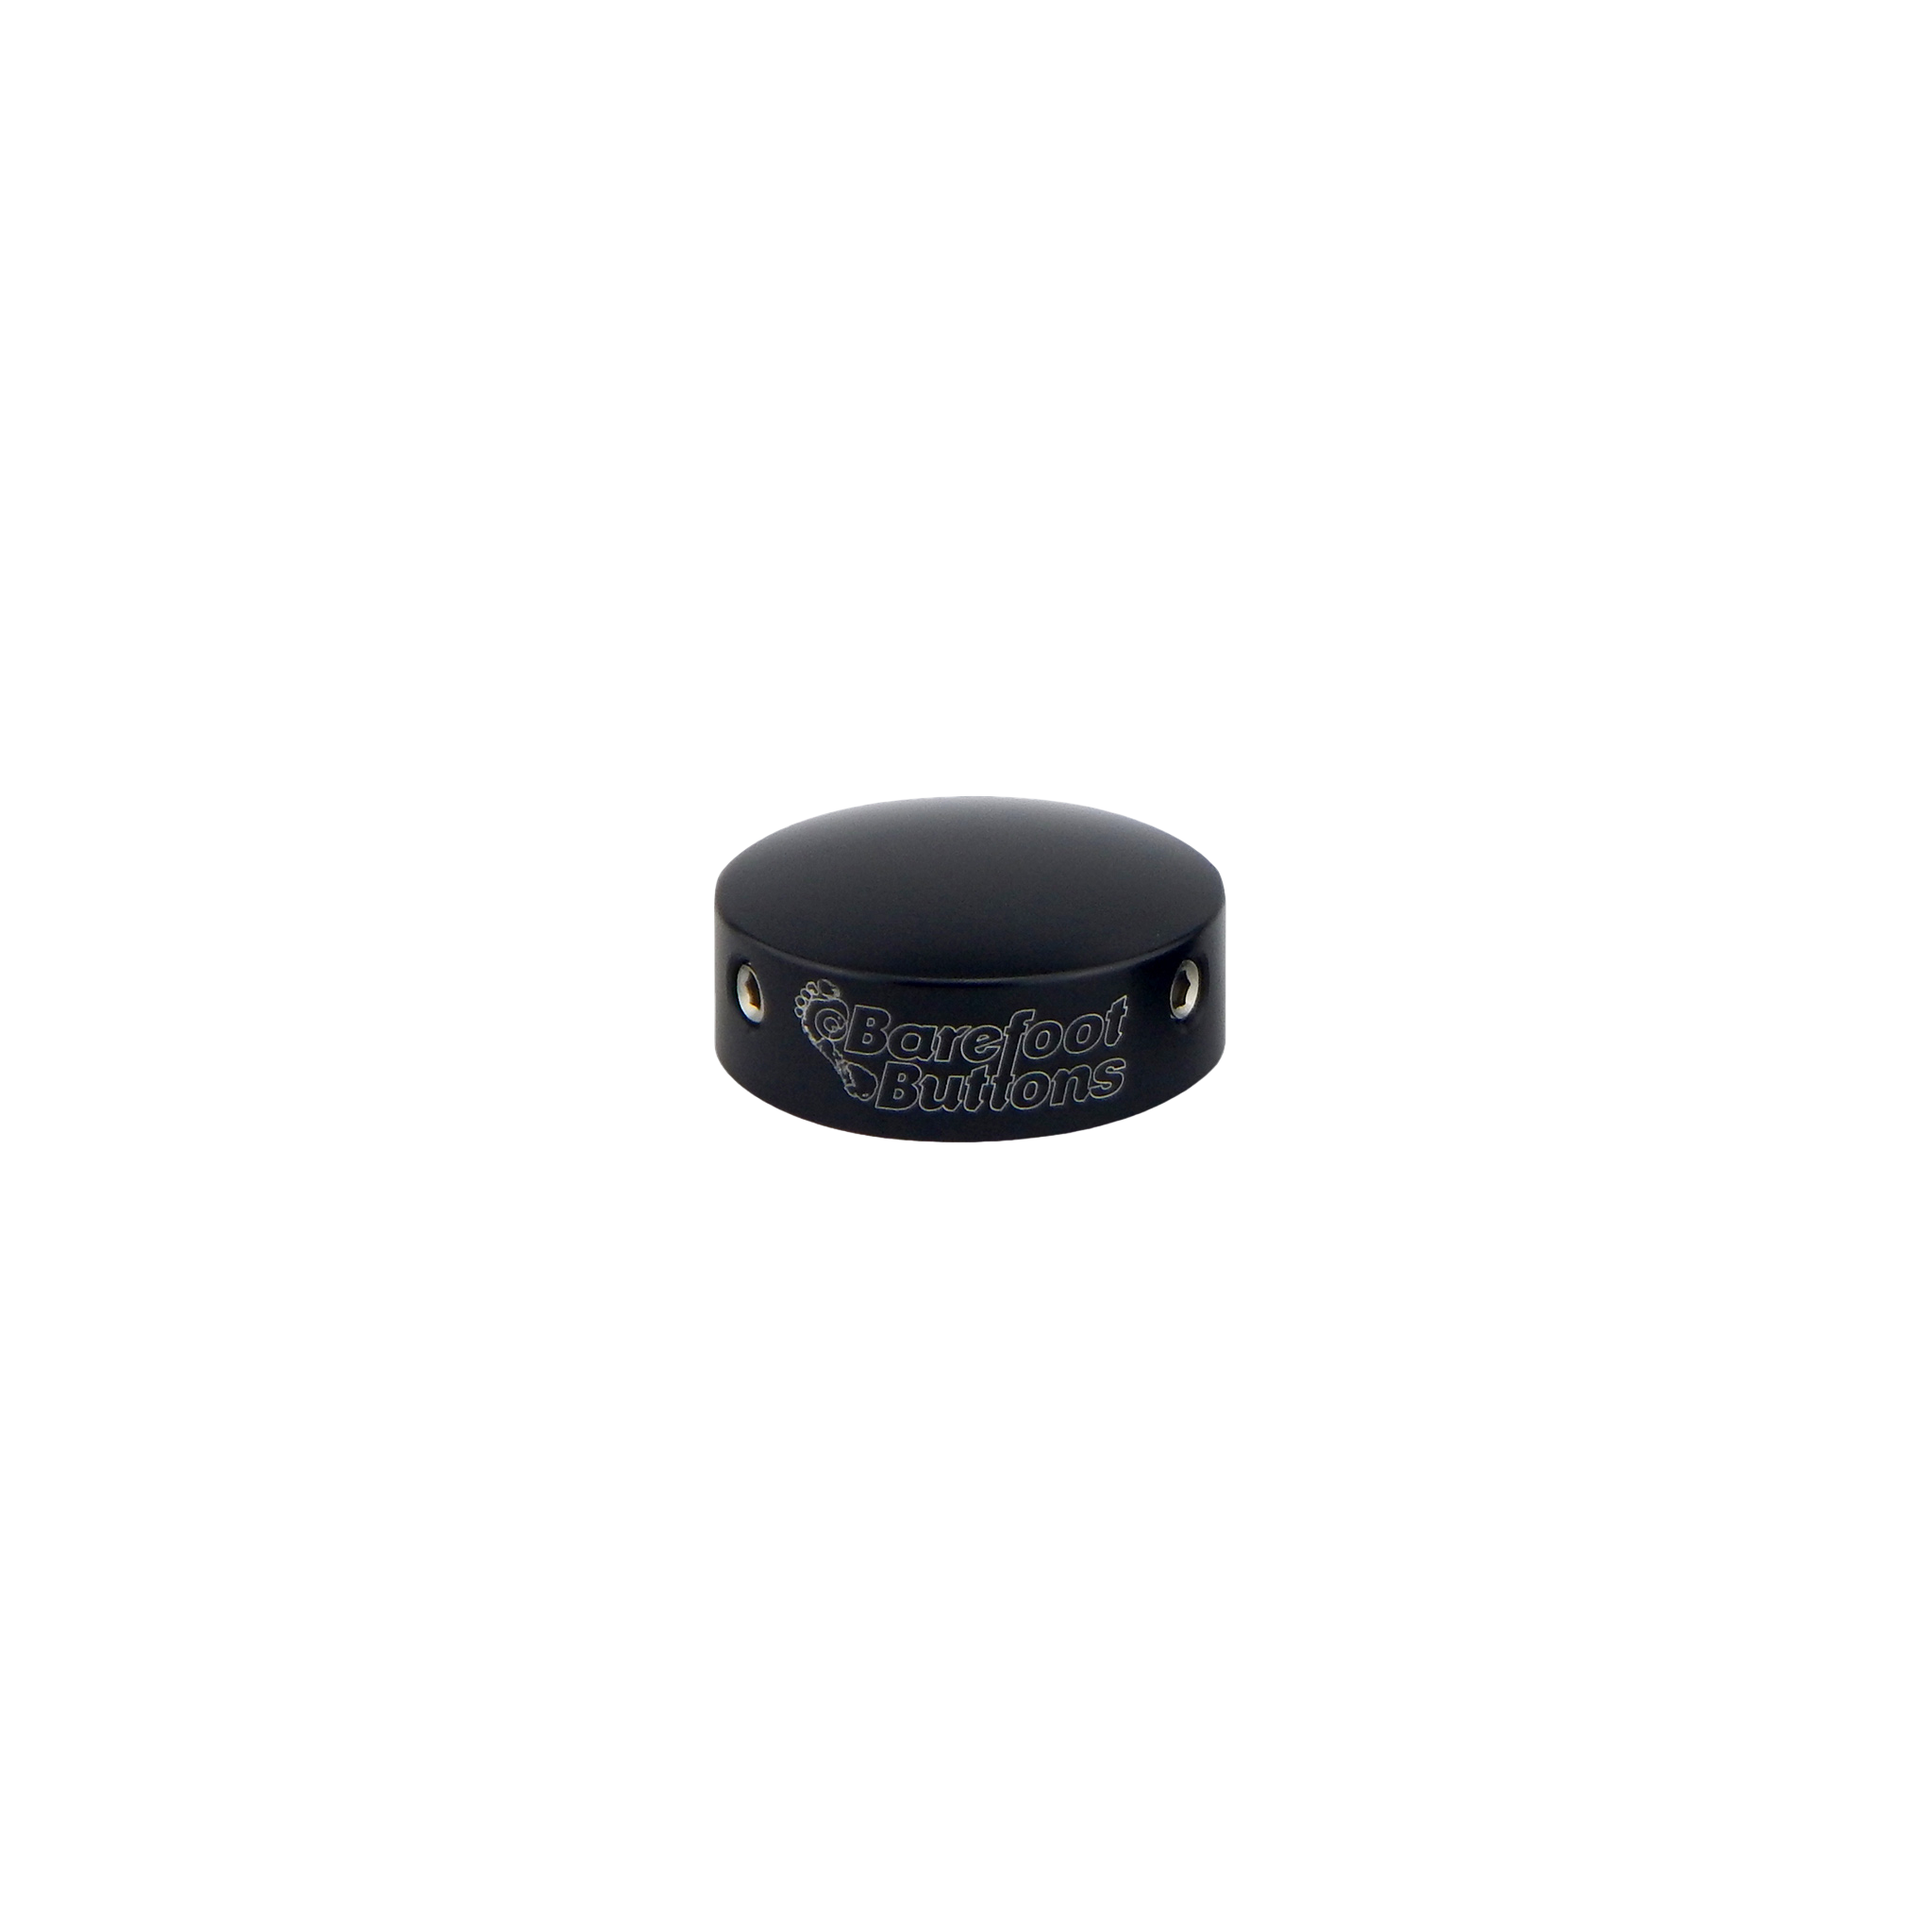 Barefoot Button Switch Cover V1 Standard Black